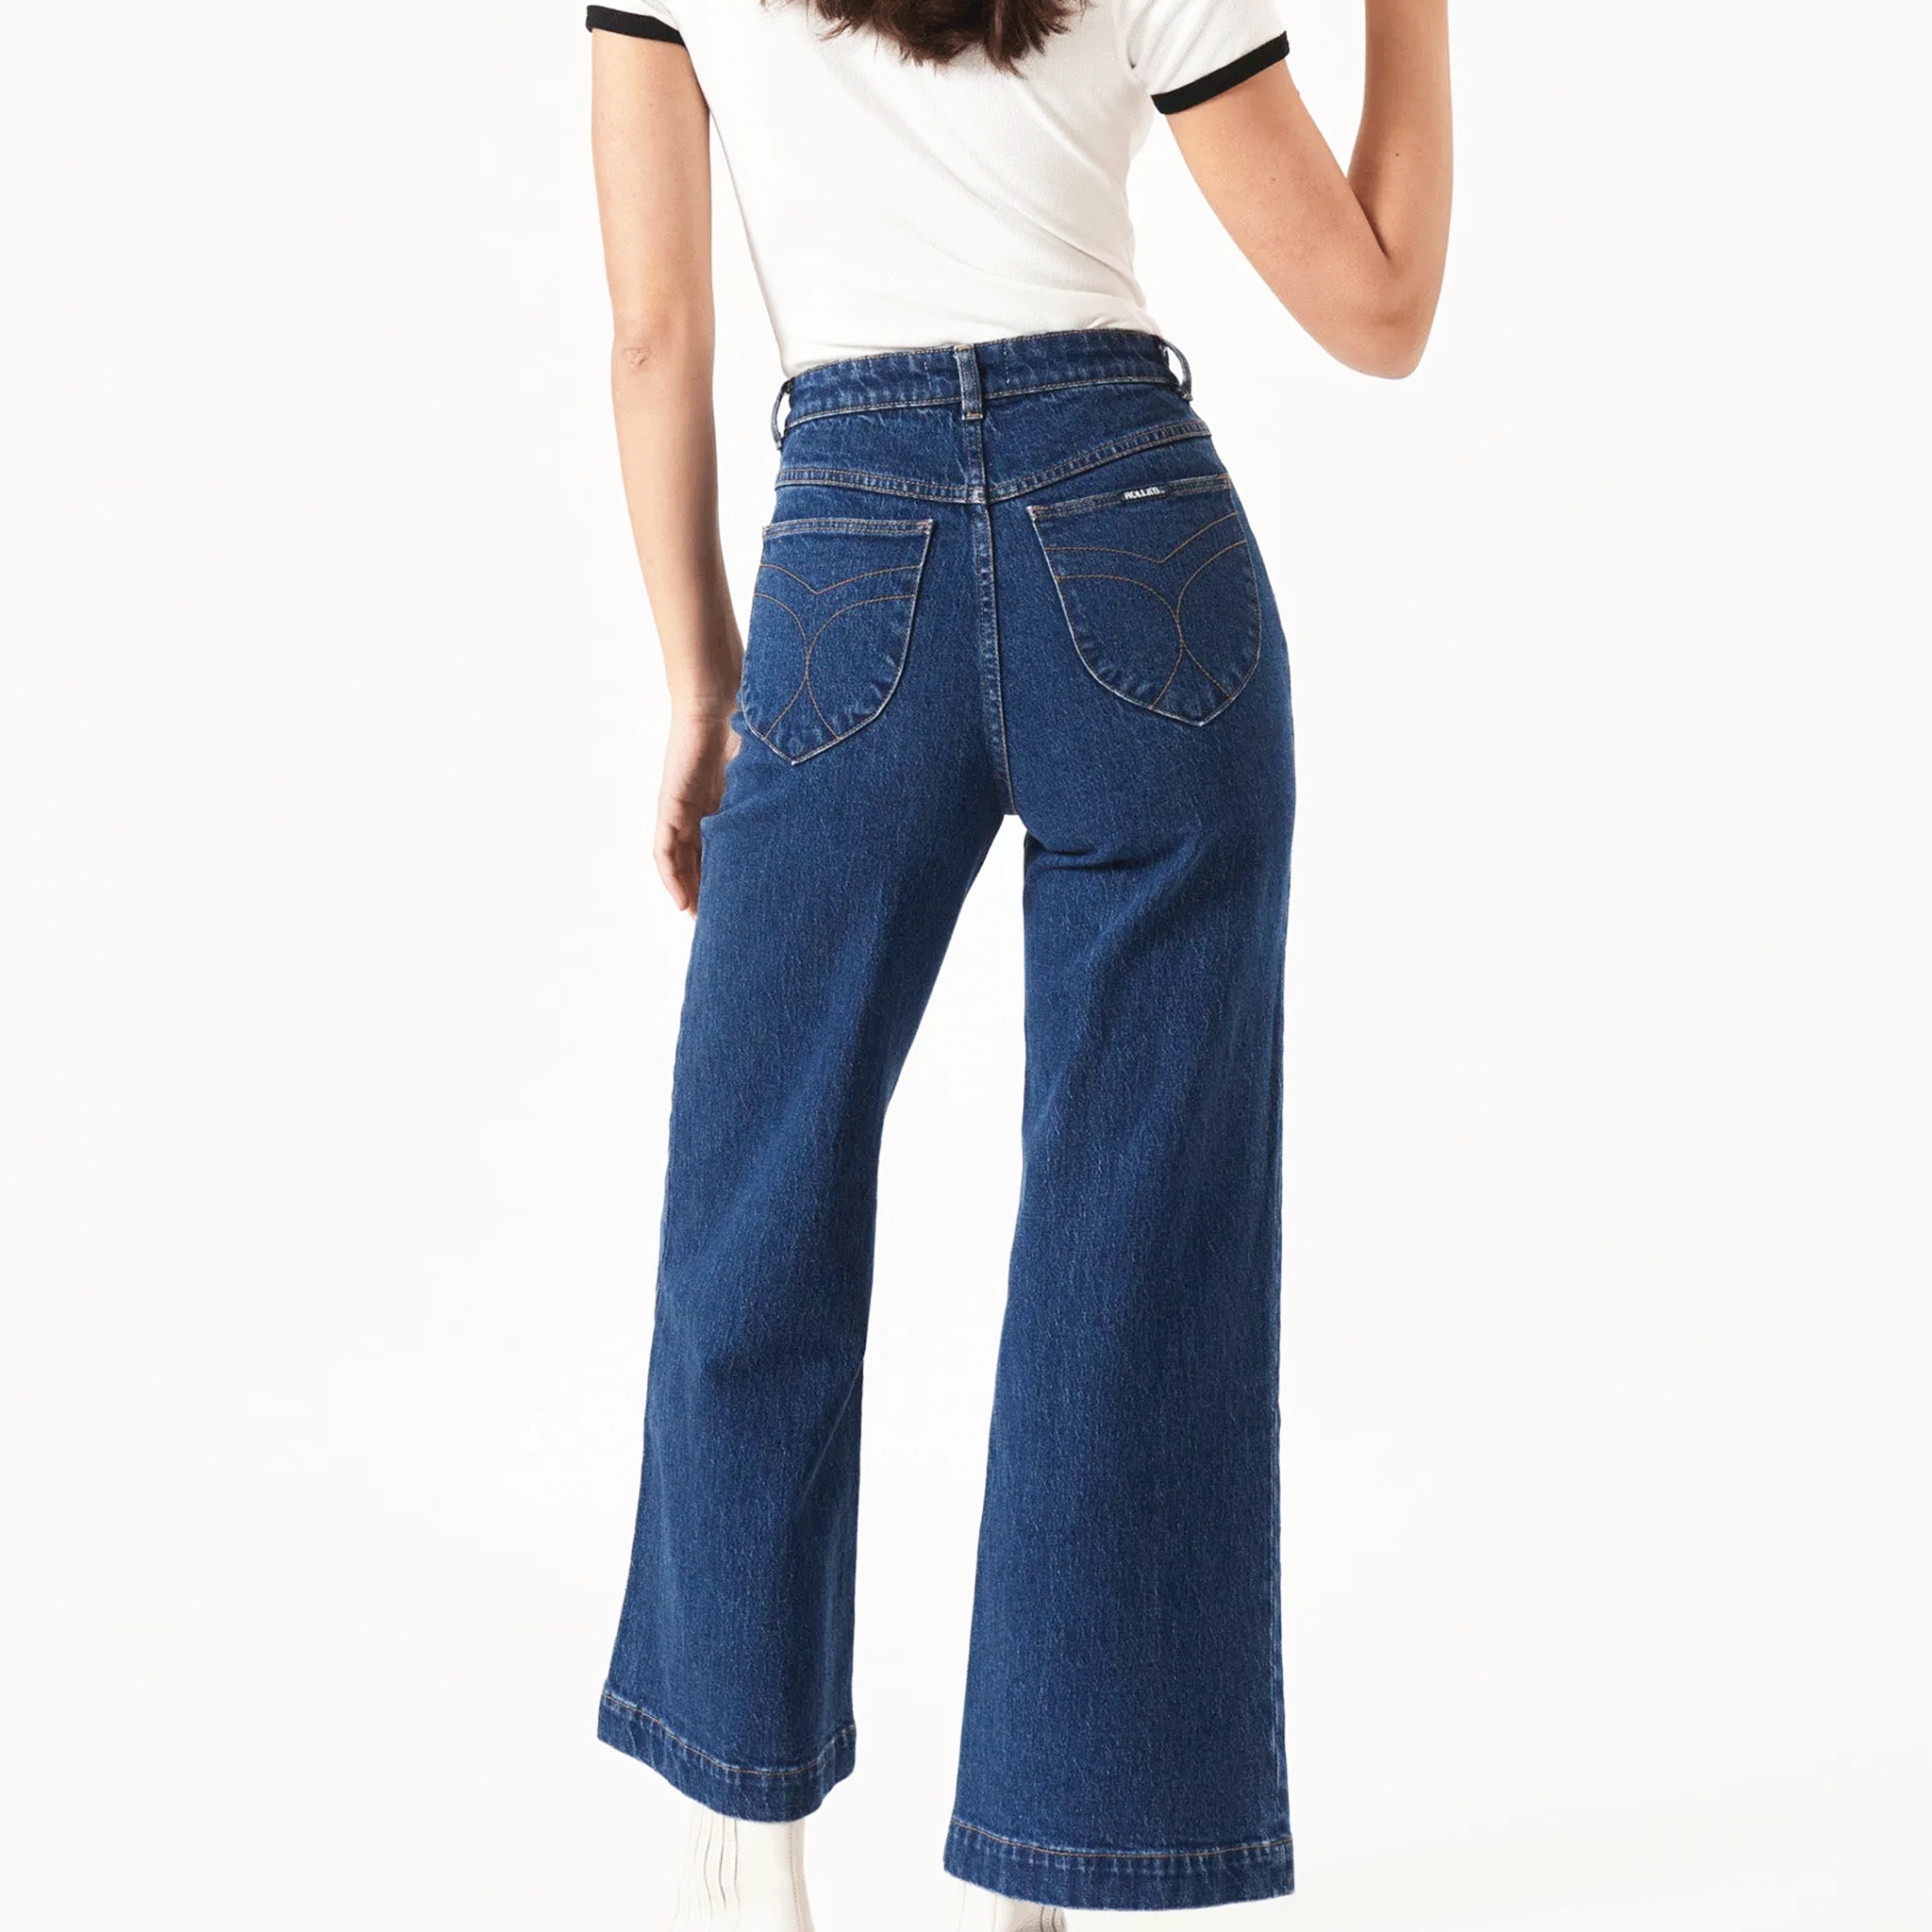 On a white background is a model wearing a dark blue pair of denim jeans with front pockets, a high waist and flair bottoms.